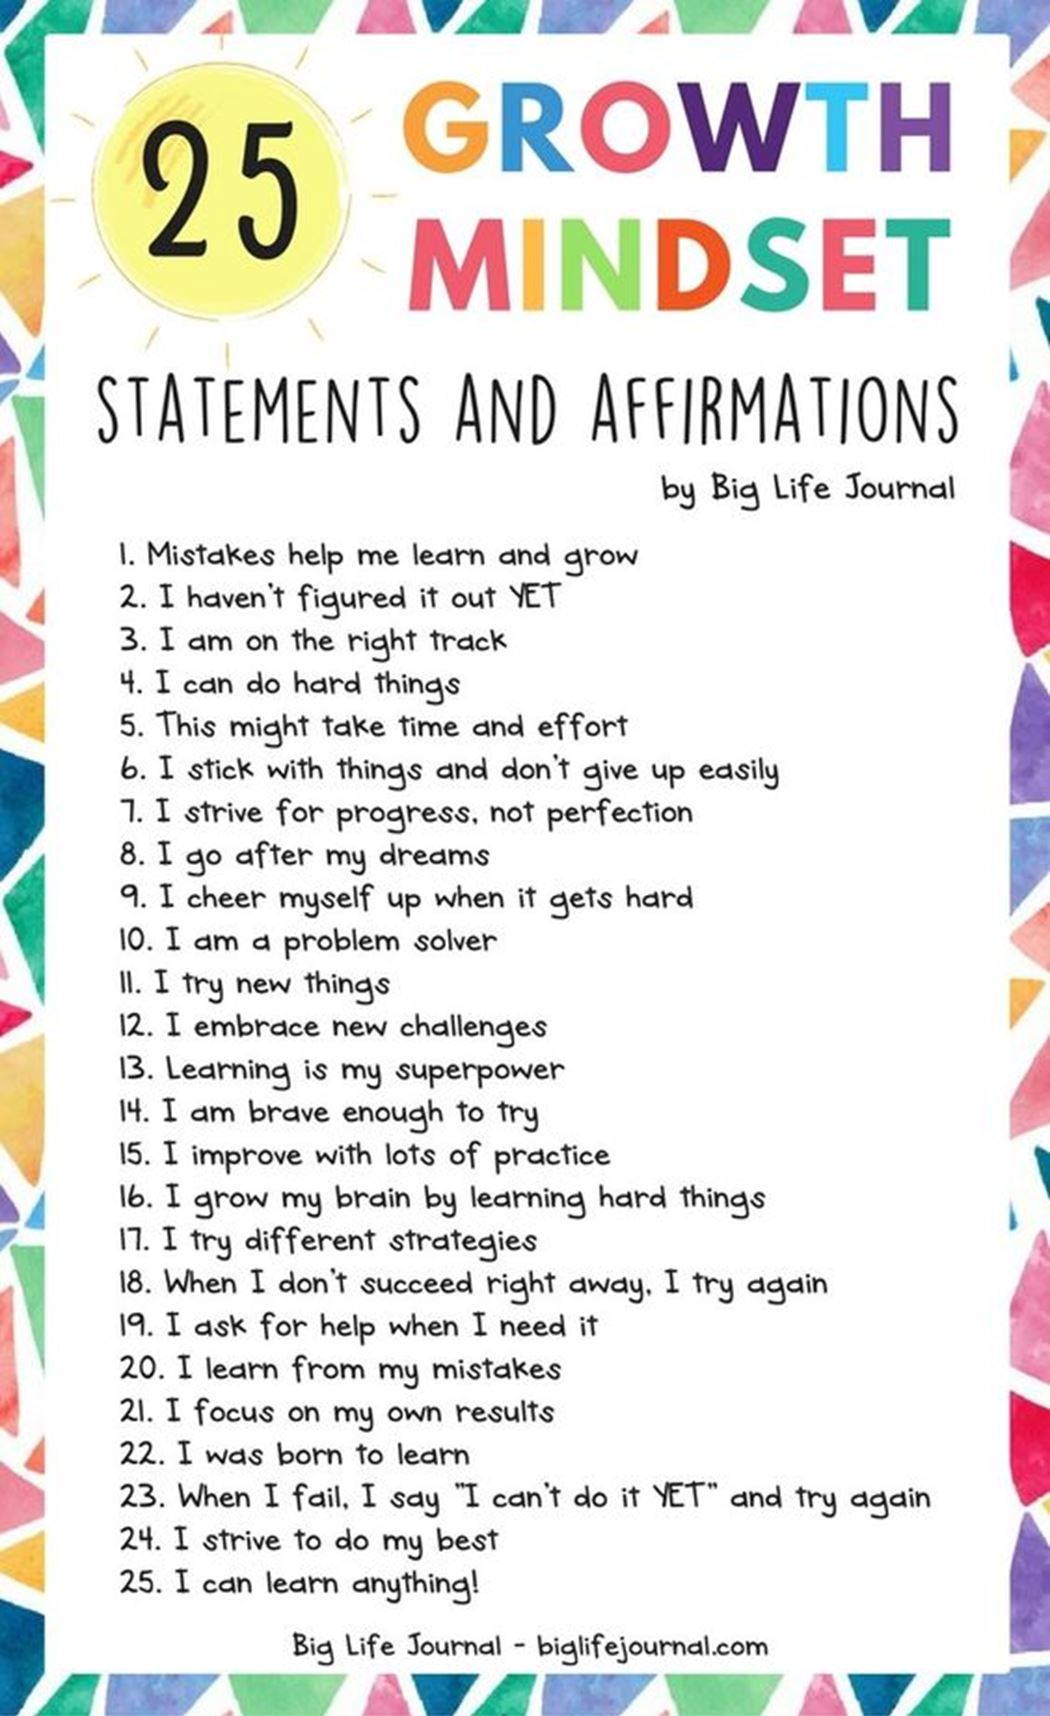 Mindfulness statements and affirmations.jpg